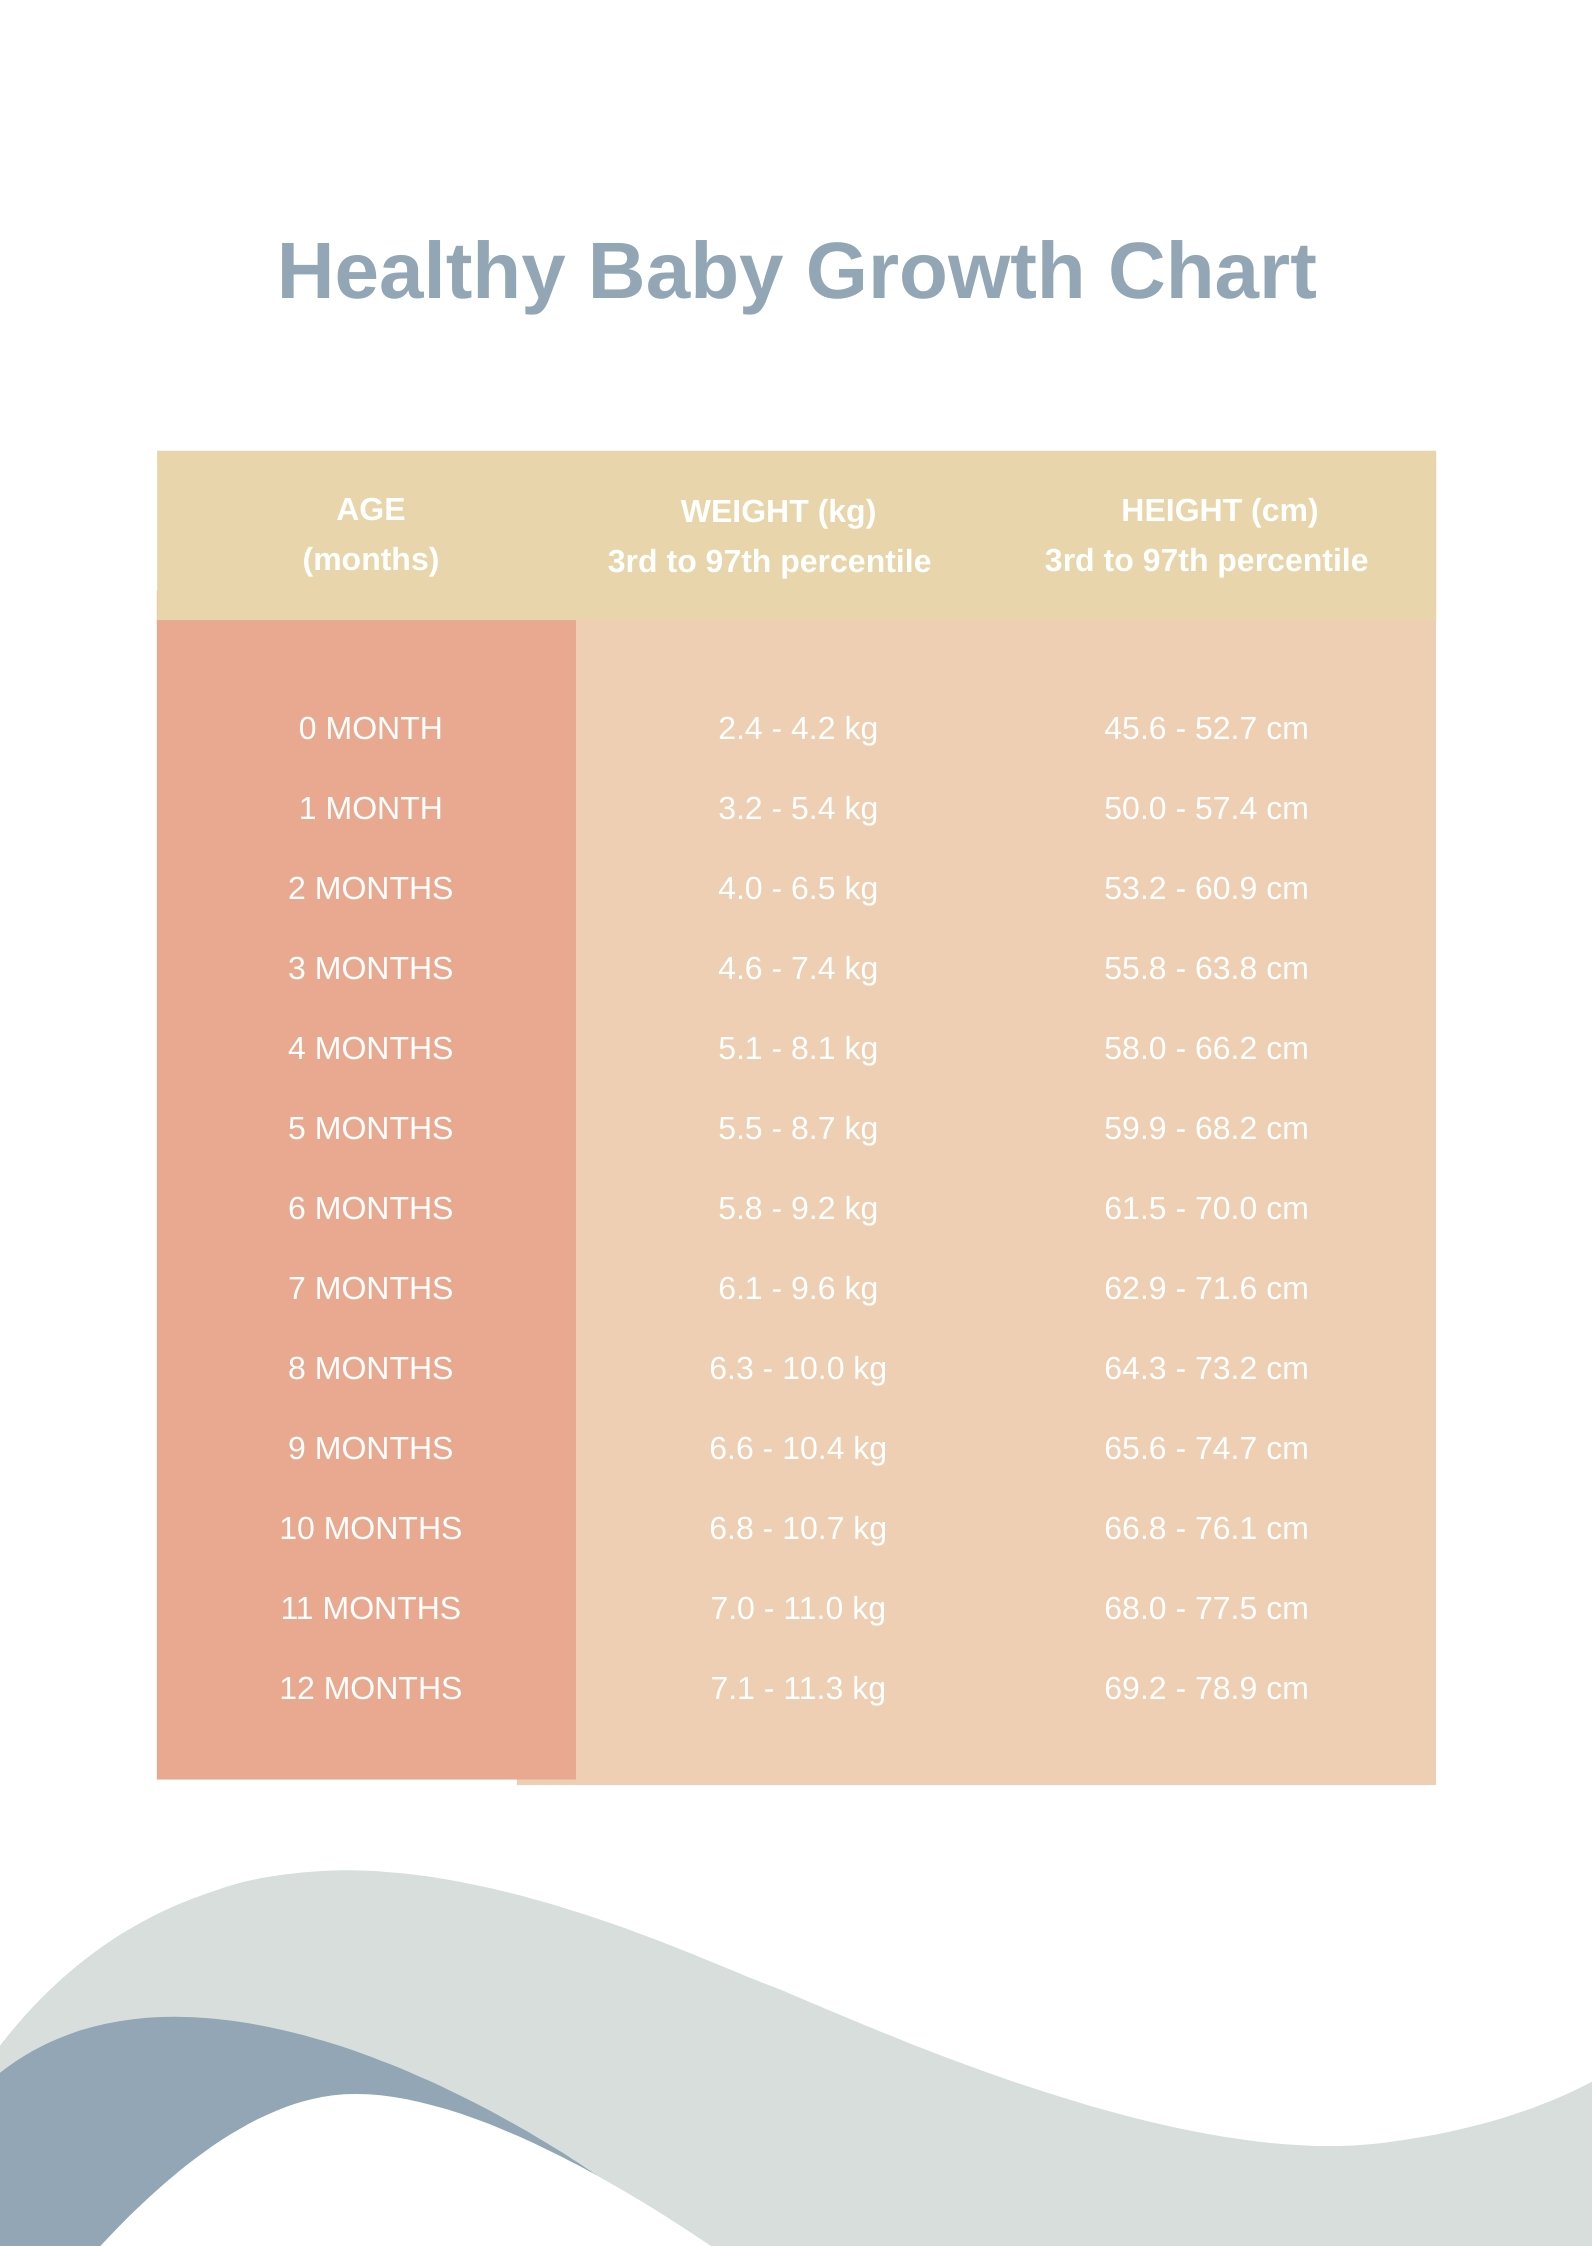 Free Healthy Baby Growth Chart in PDF